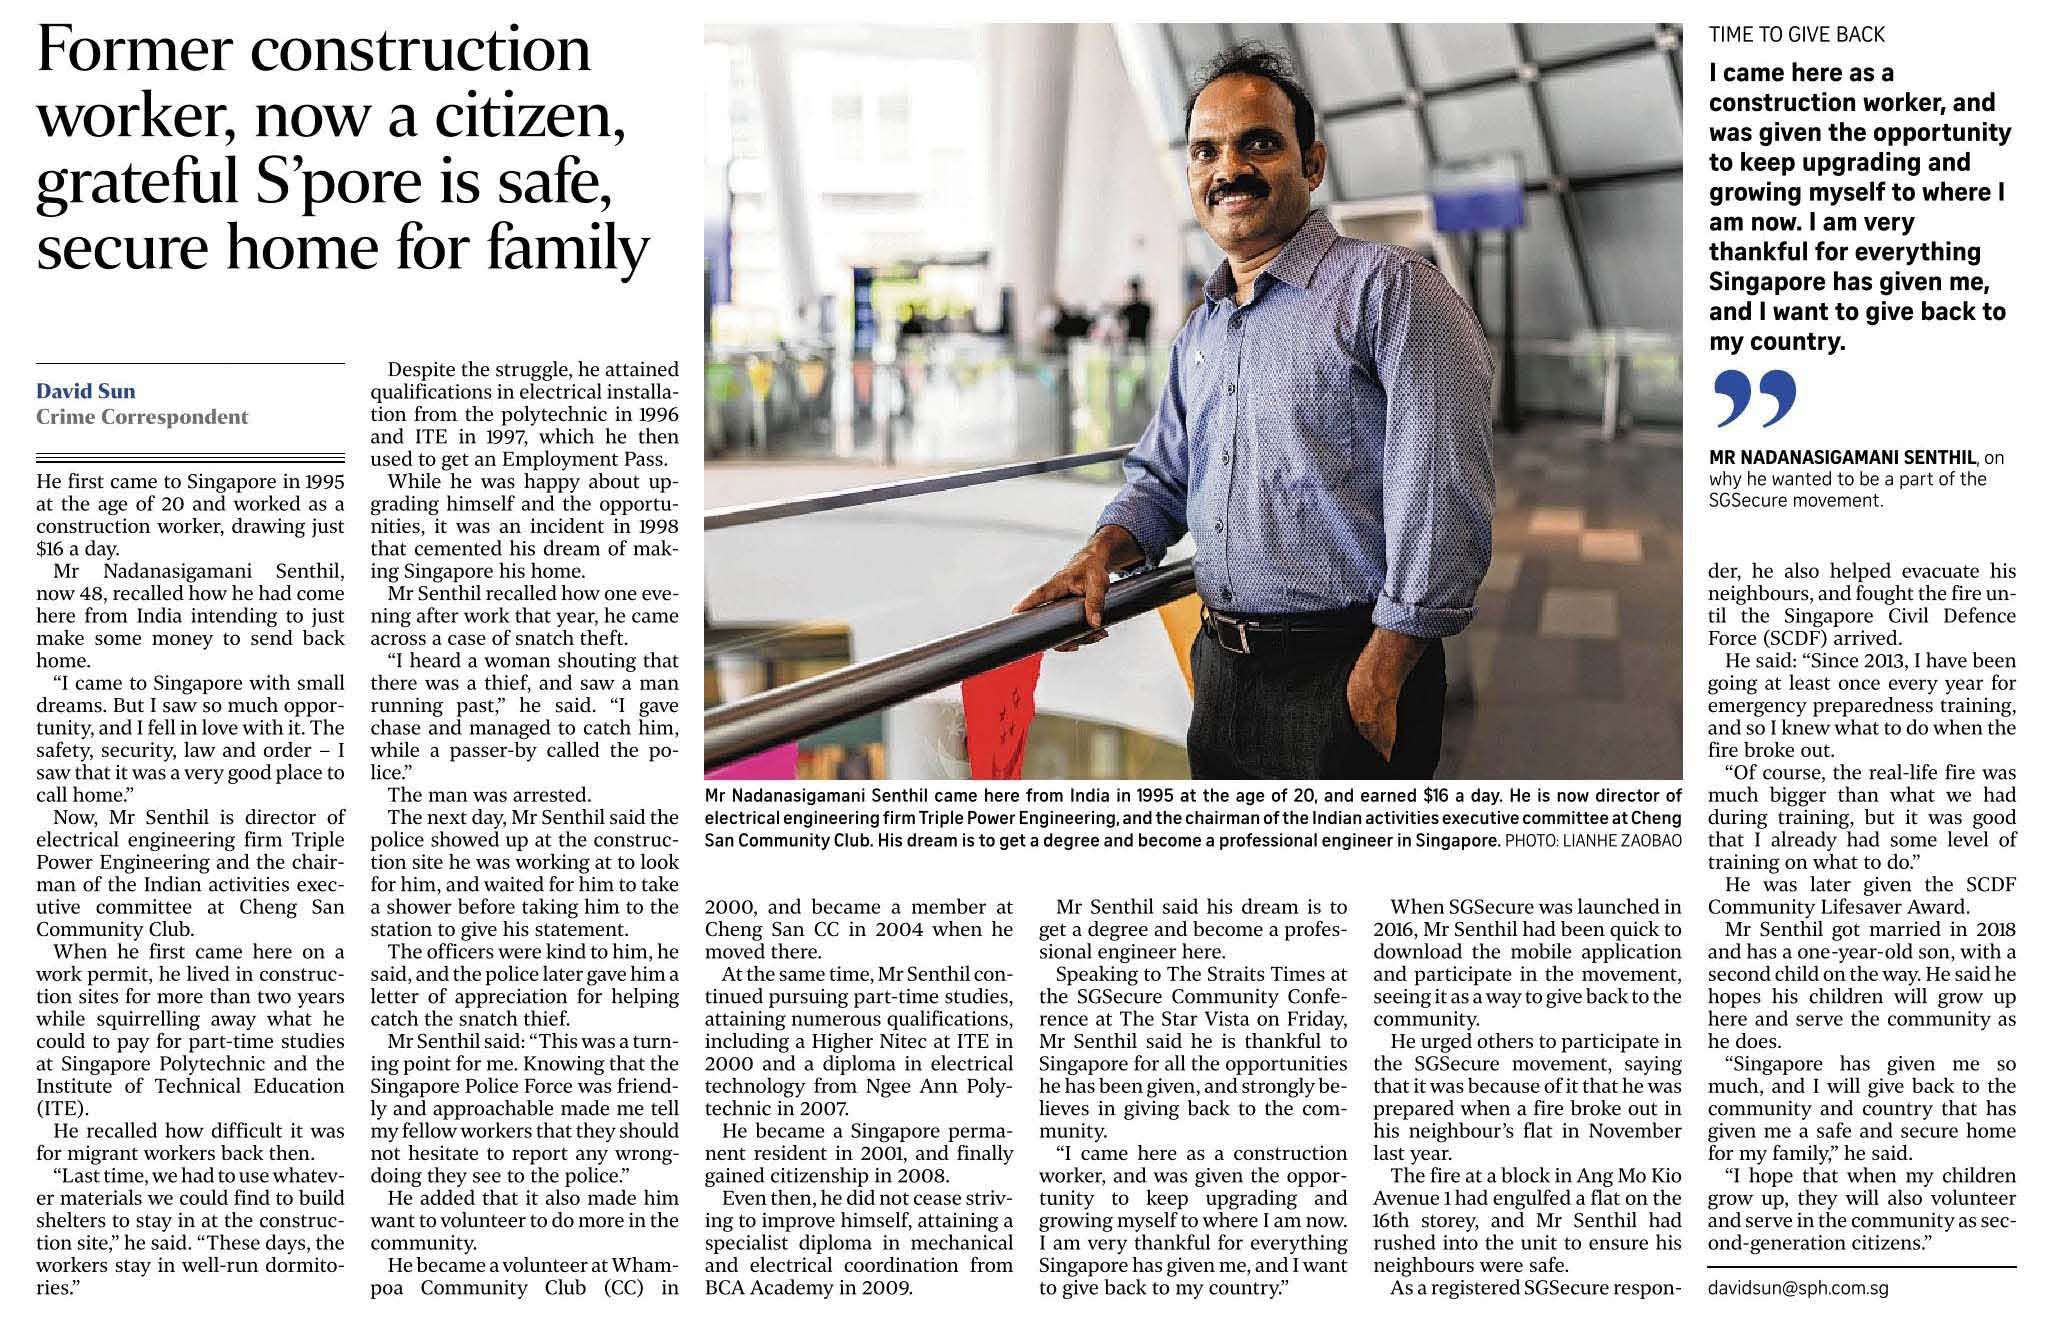 ST - Ex-construction worker, now a citizen and grateful S’pore is ‘safe, secure home for my family’  (29 July)